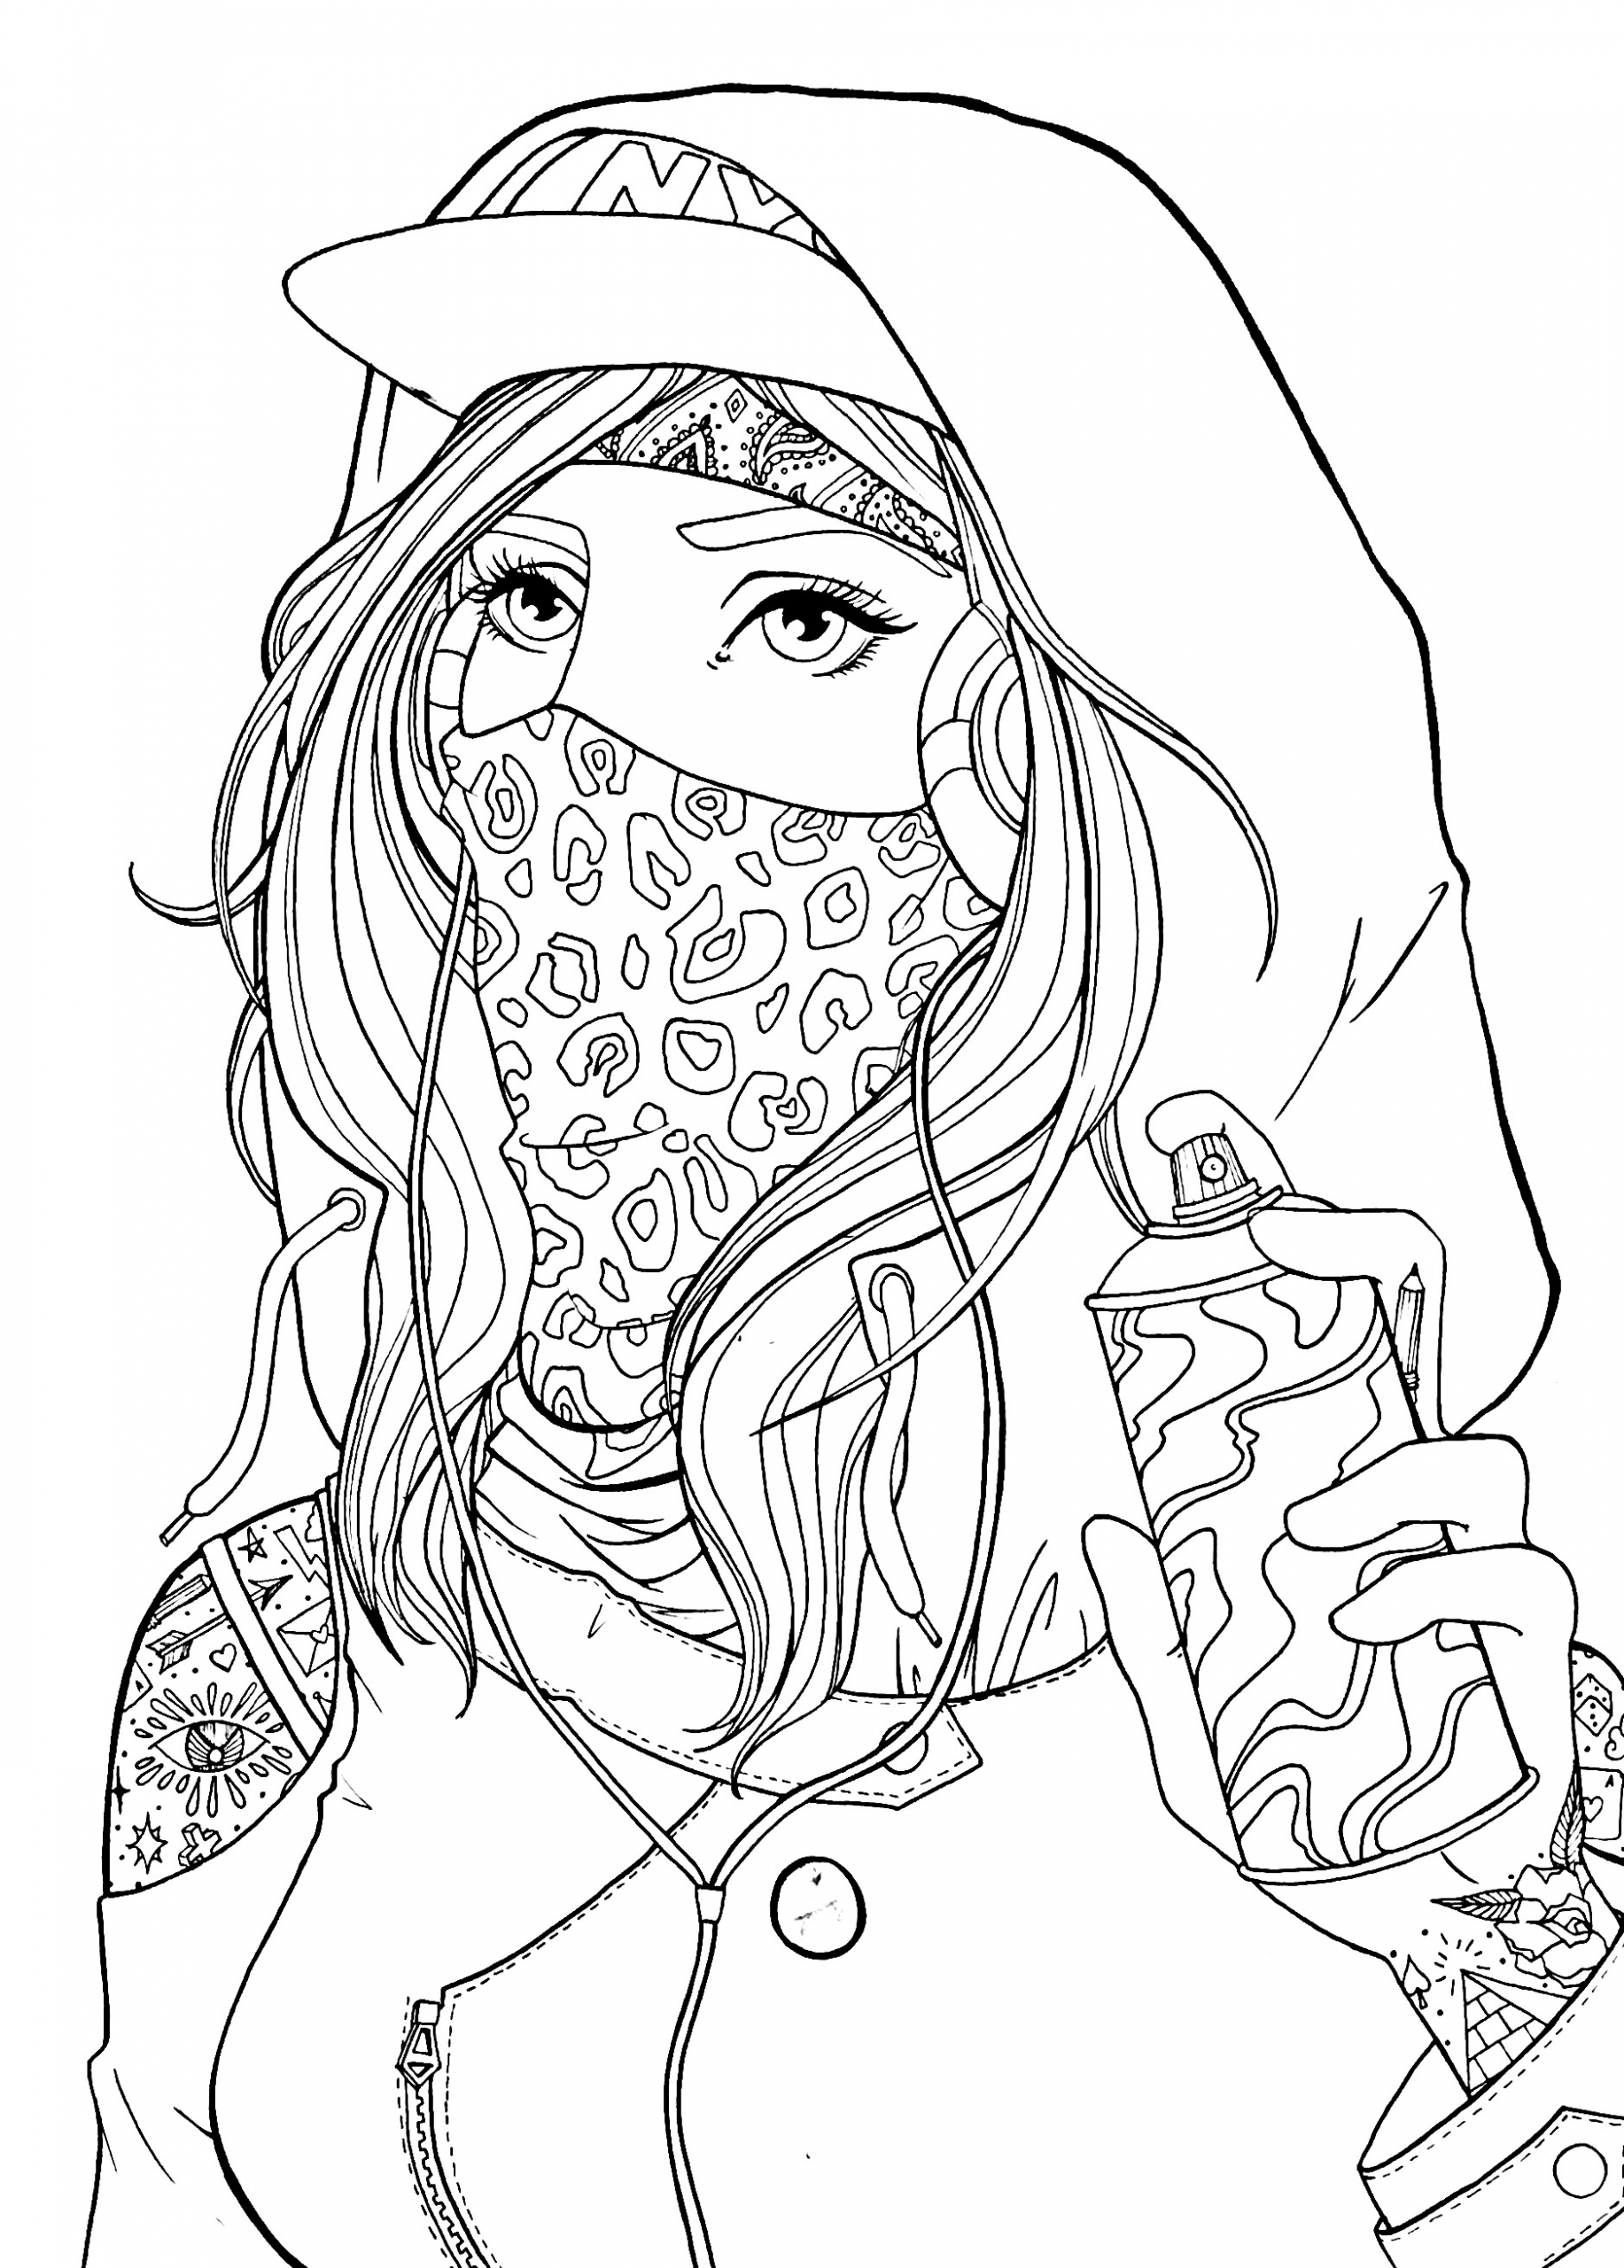 Coloring Pages Of Girls
 Graffiti girl drawing lineart